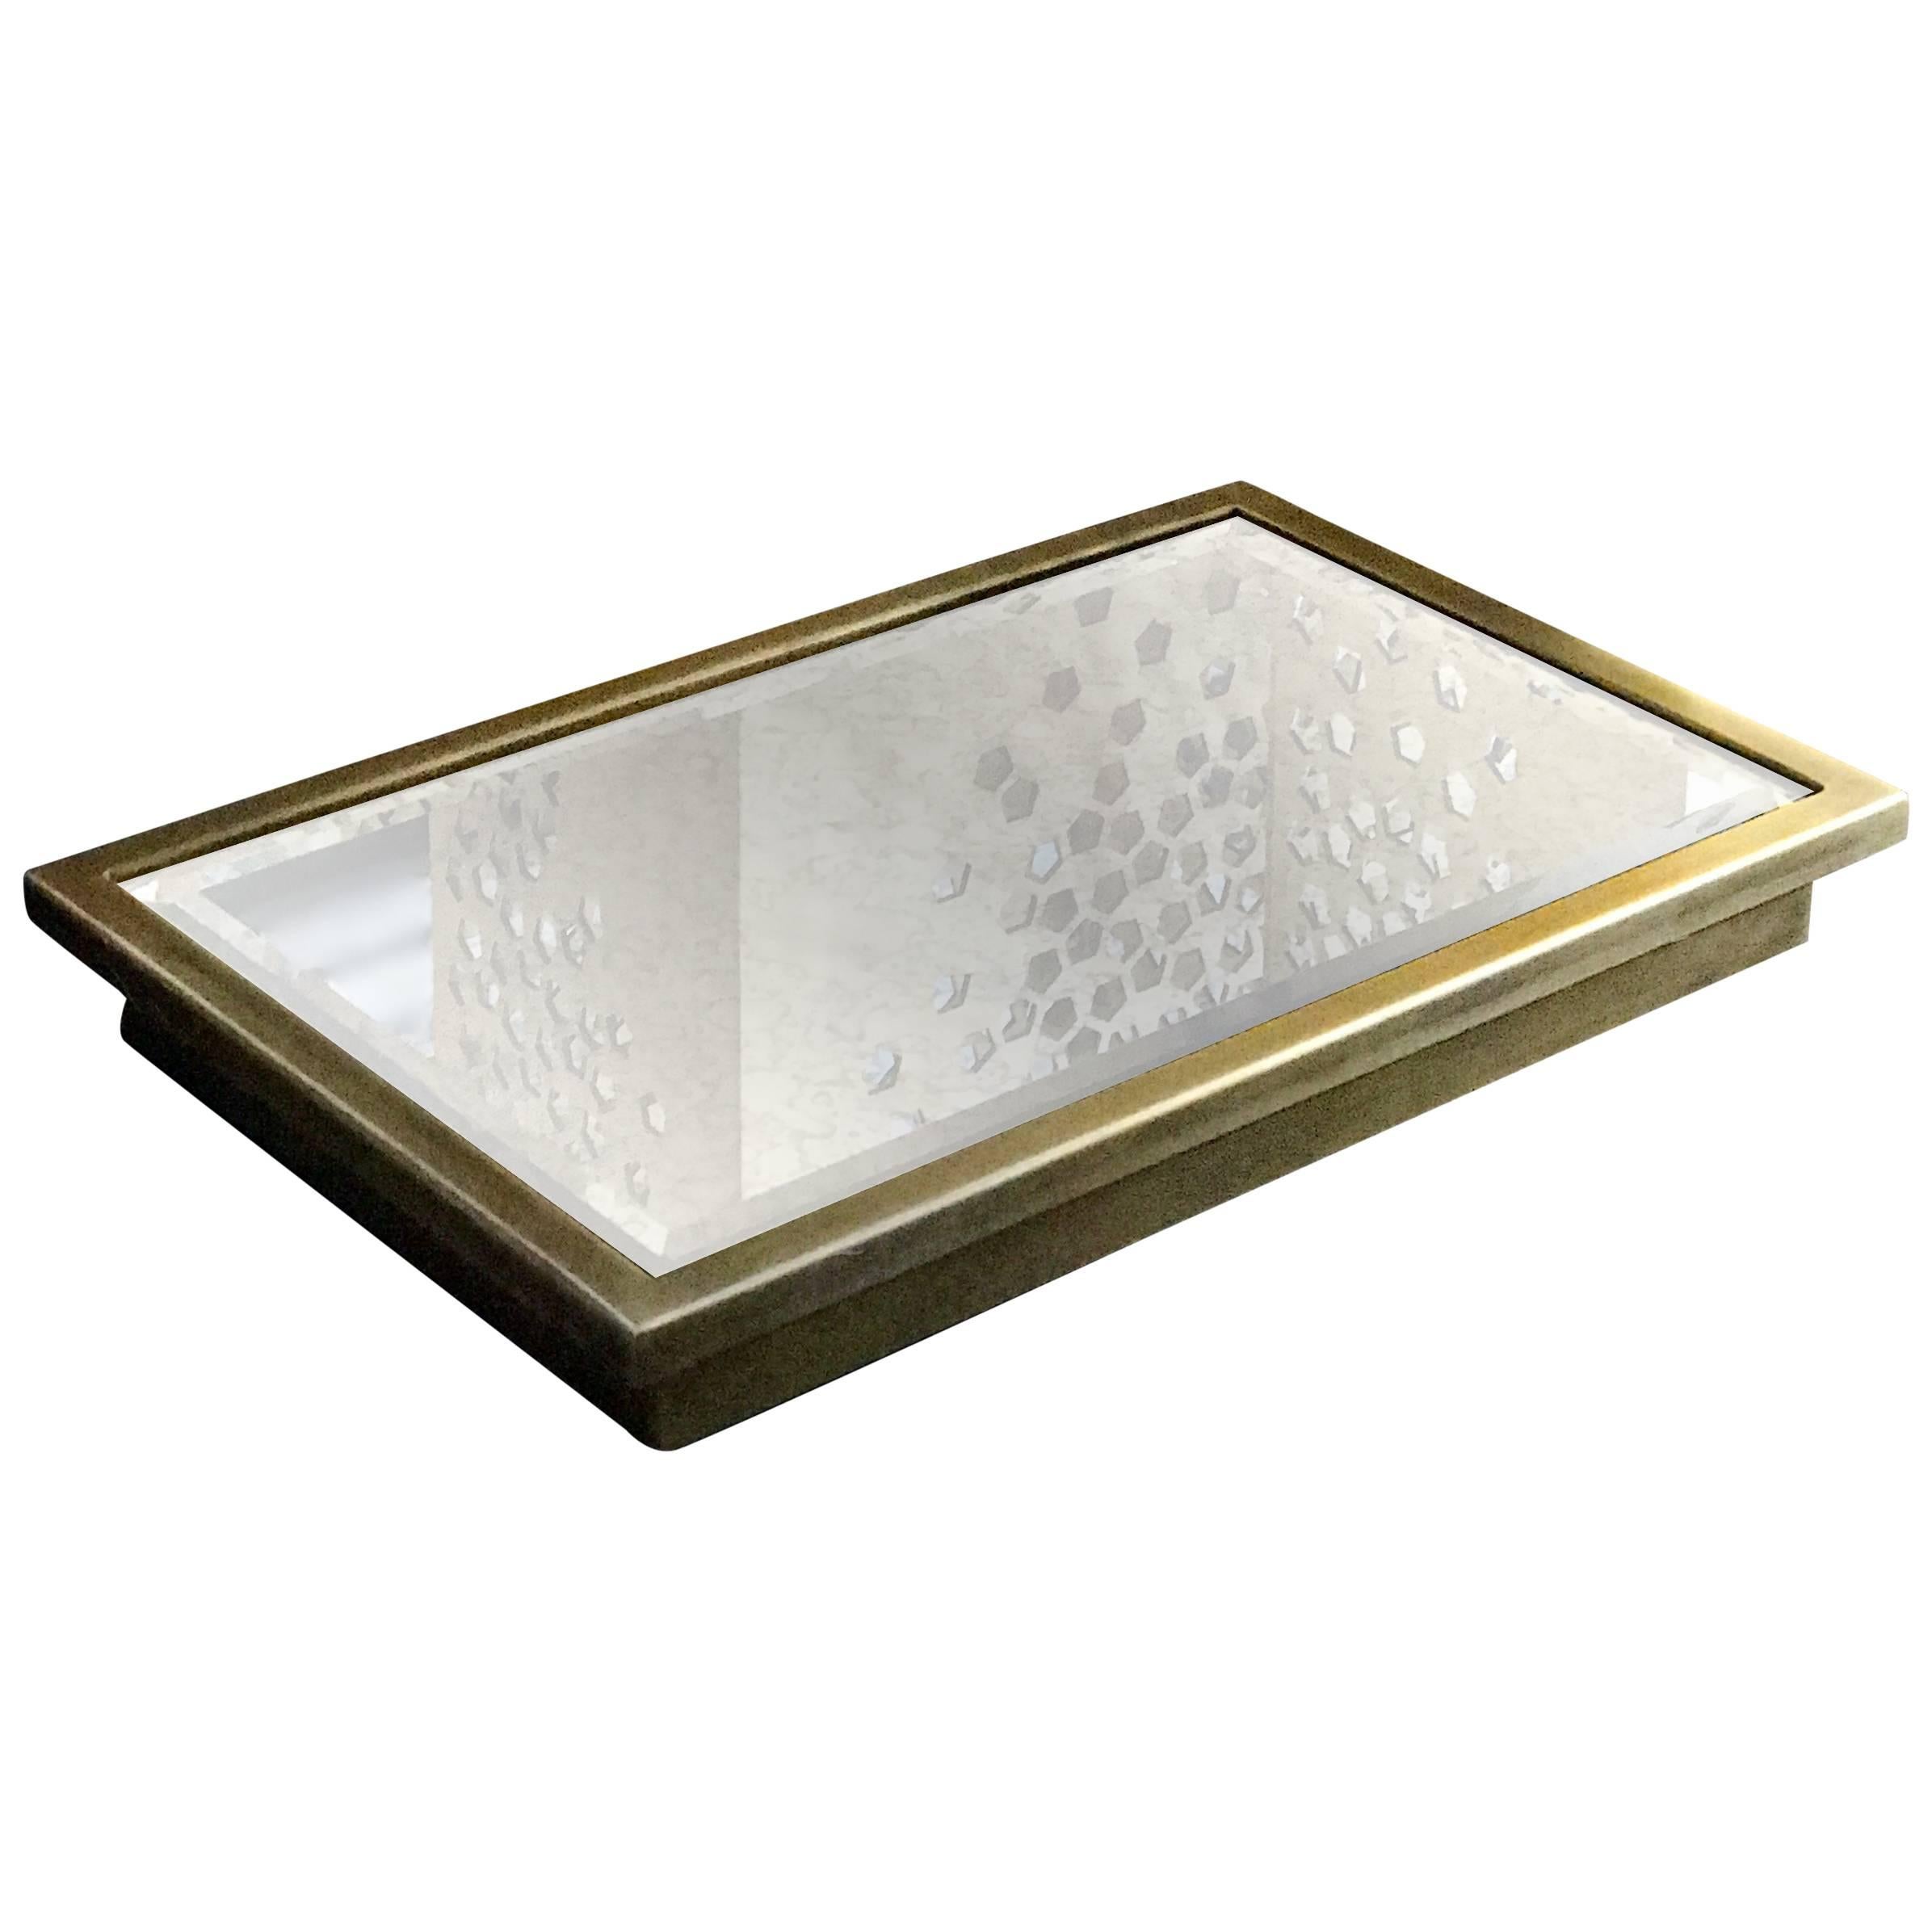 Vulcano Tray Plated with Antique Mirror Surface